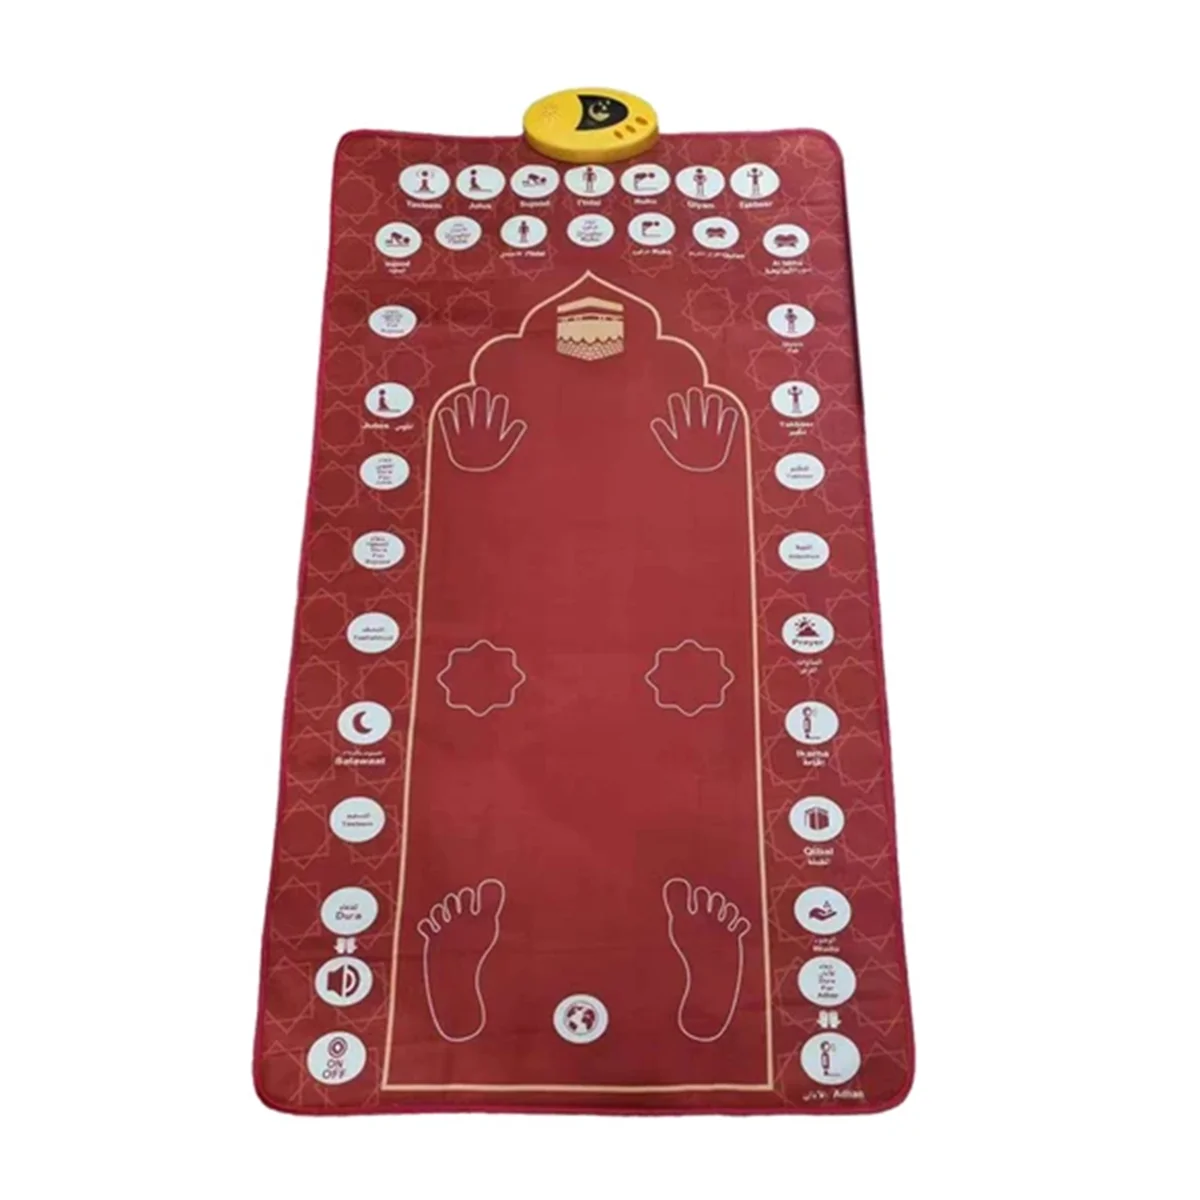 

131x75CM Adult Electronic Interactive Music Worship Blanket Praying Rug for Party Travel Home Worship Mats(Red)